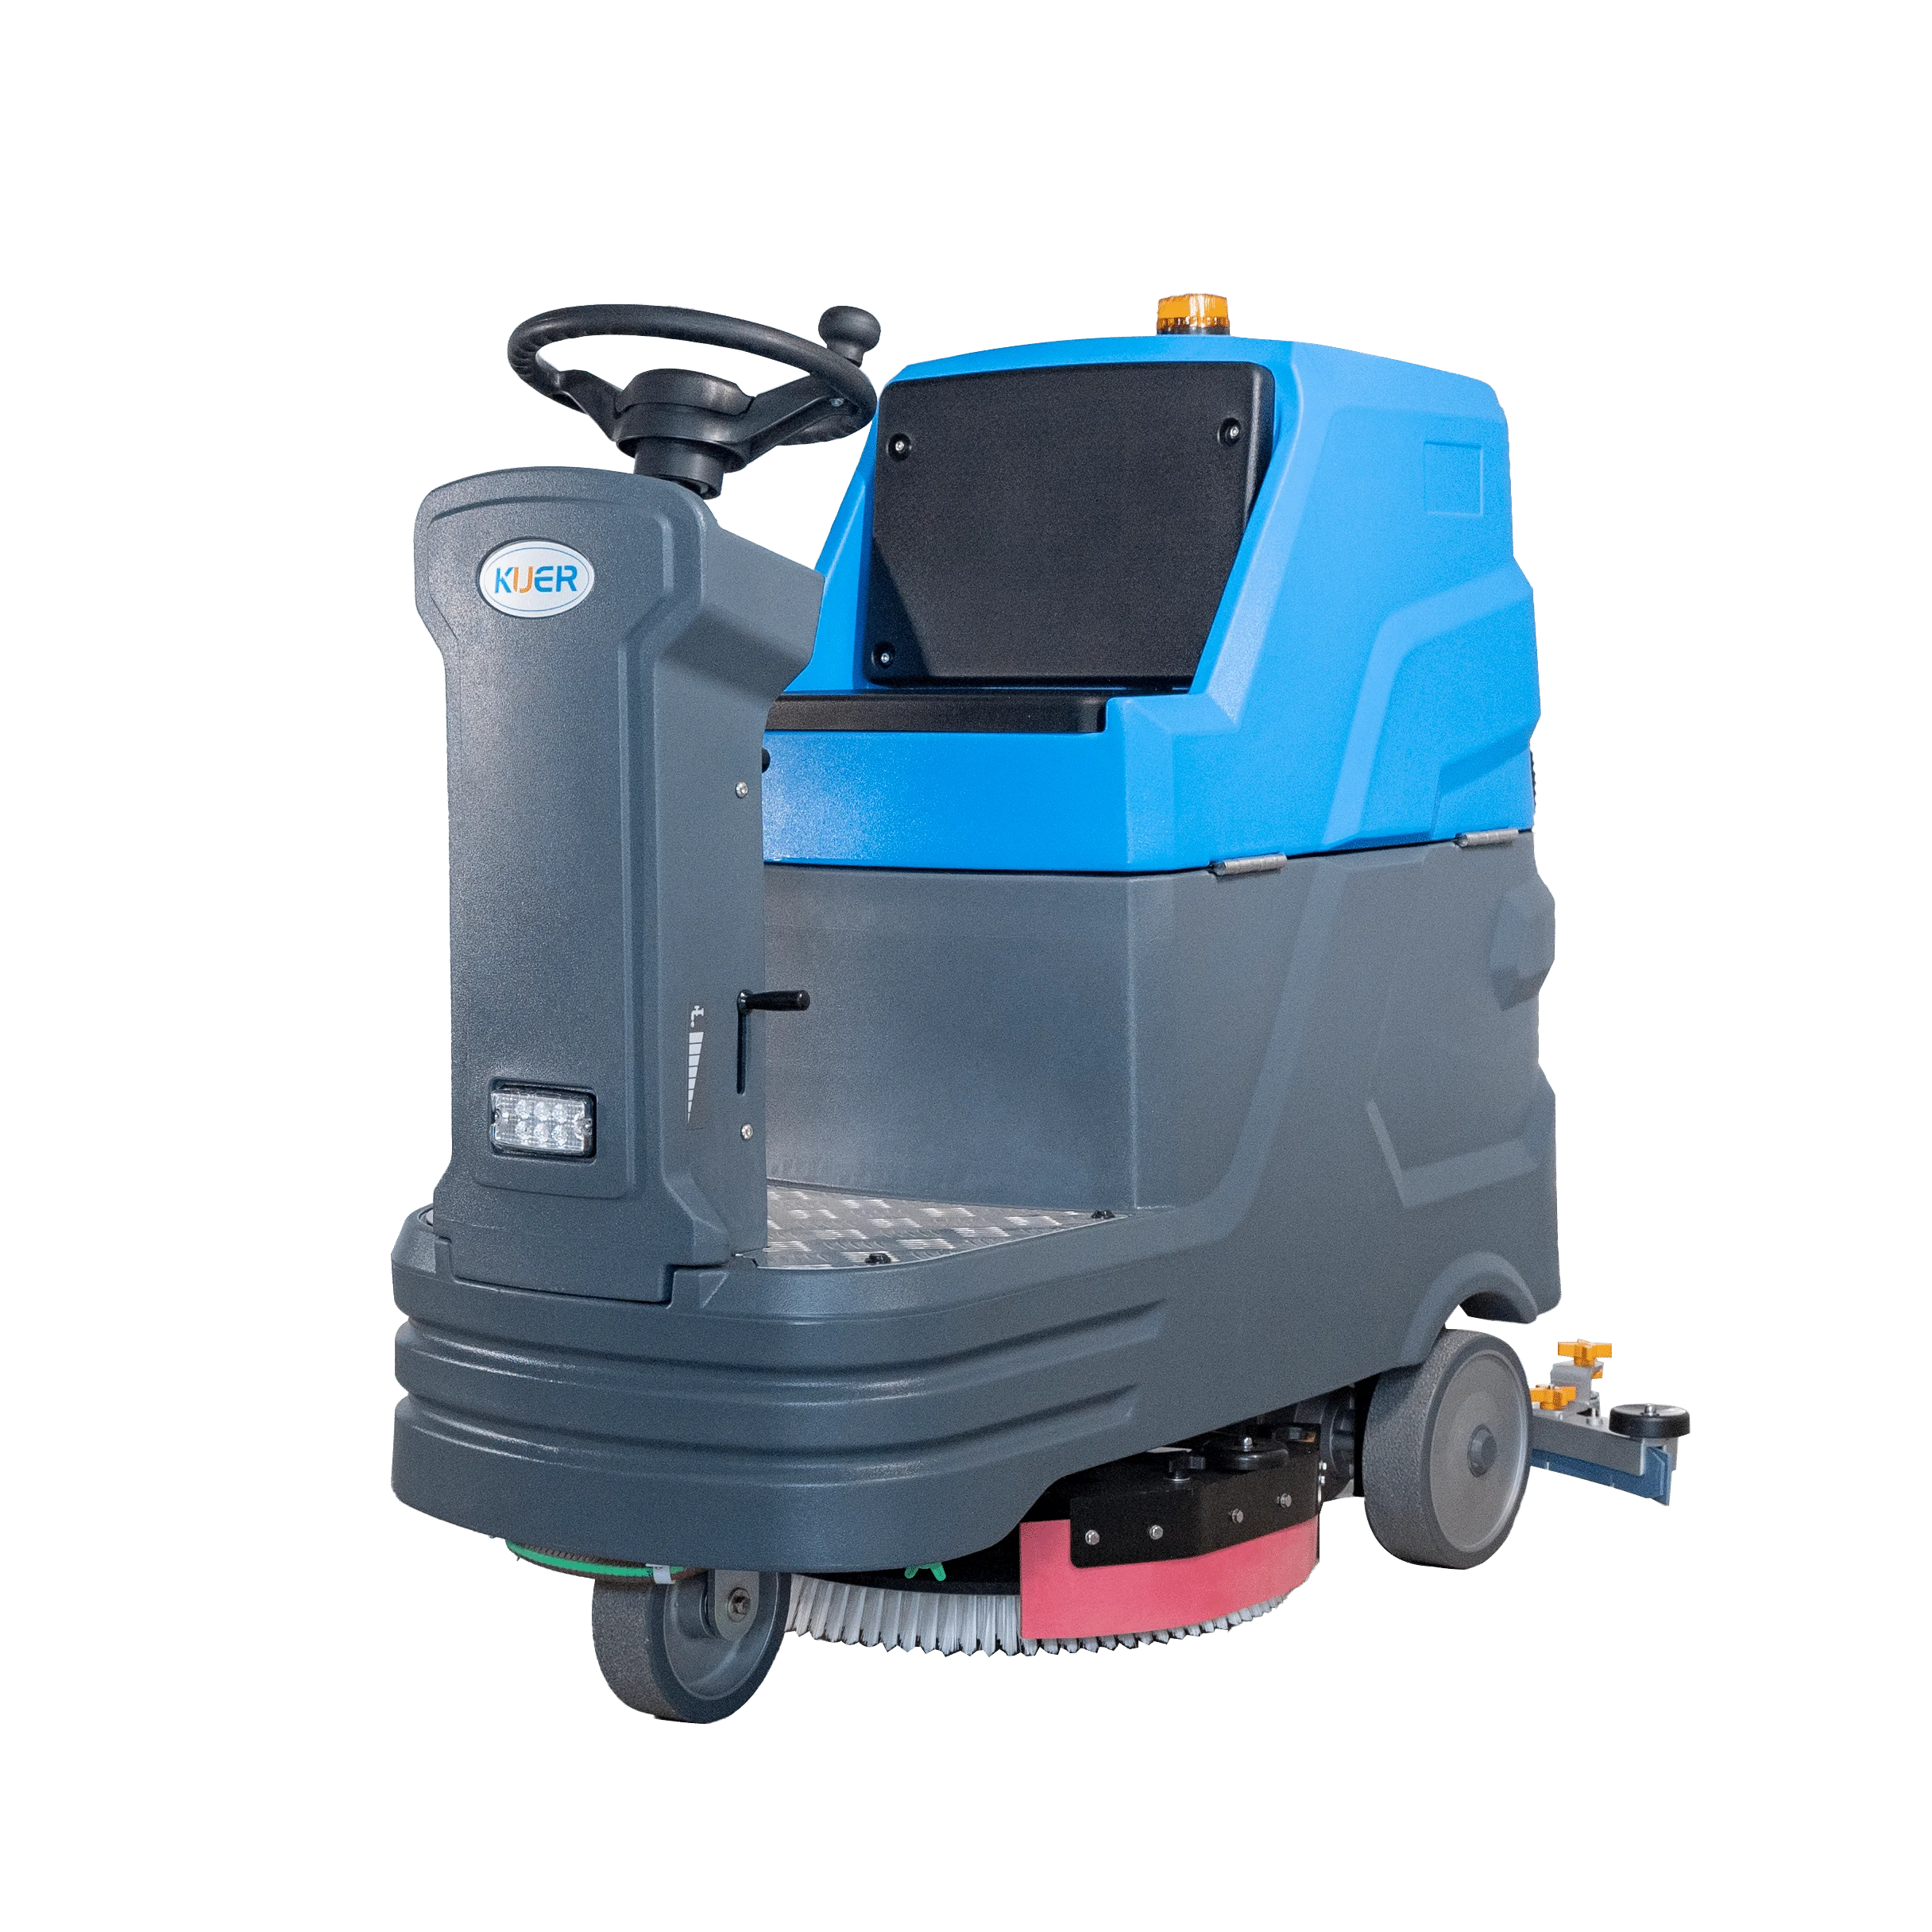 KUER 13″ Dual Disk Brush Ride-on Floor Scrubber Machine with Battery | KR-XJ80S 46,290 ft²/hr